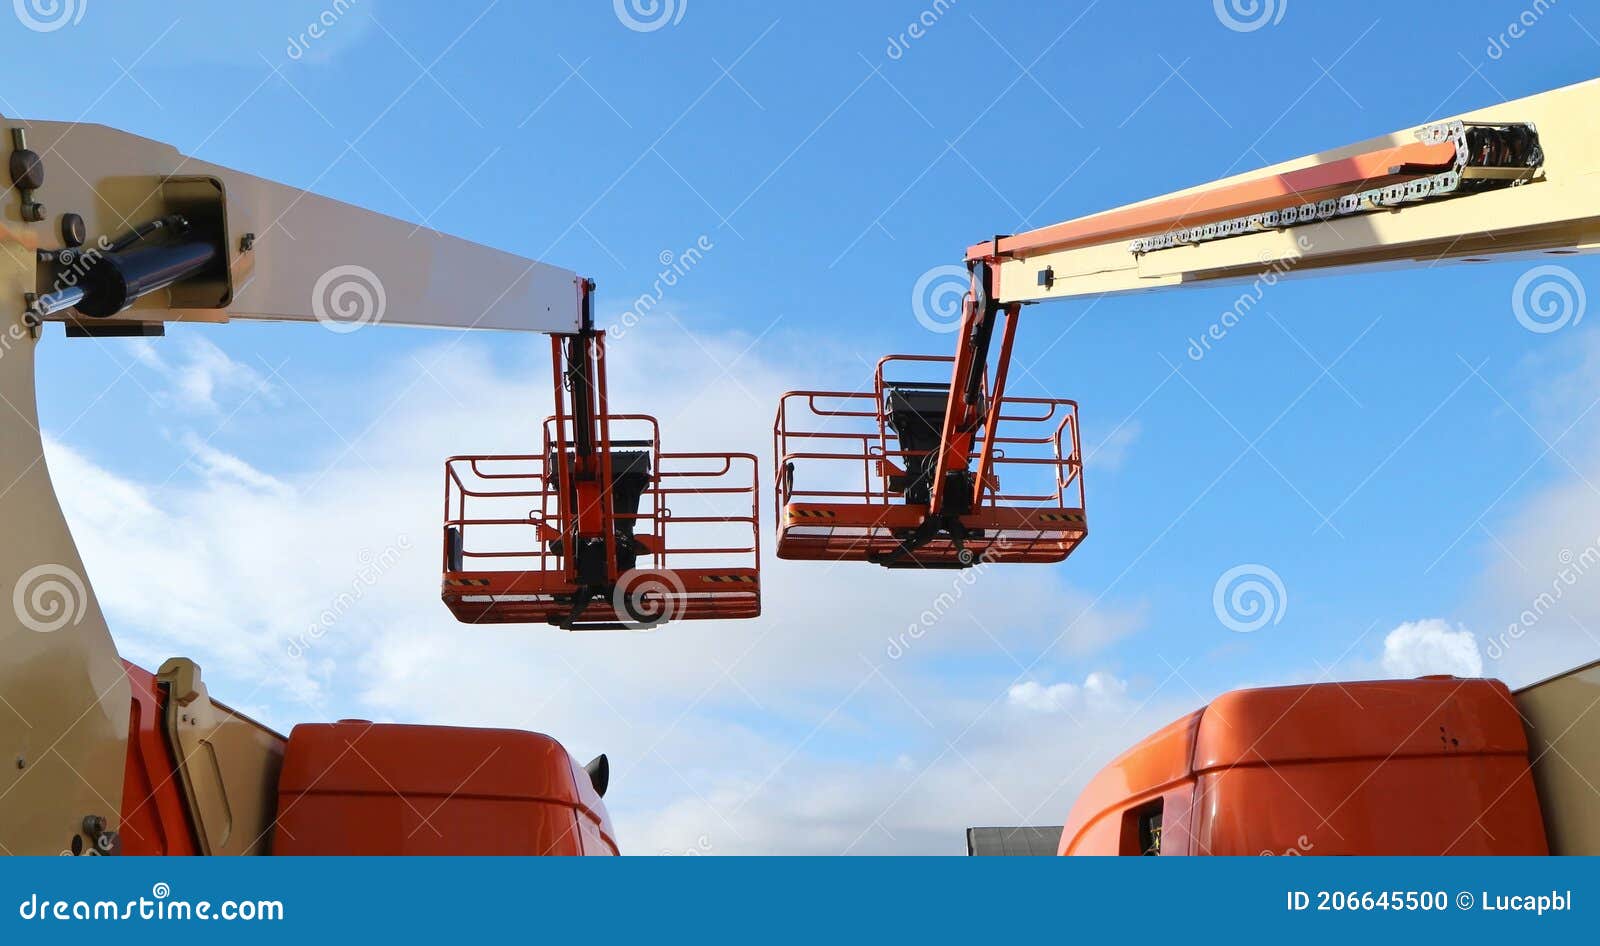 back view of two aerial work platforms against blue sky with clouds.